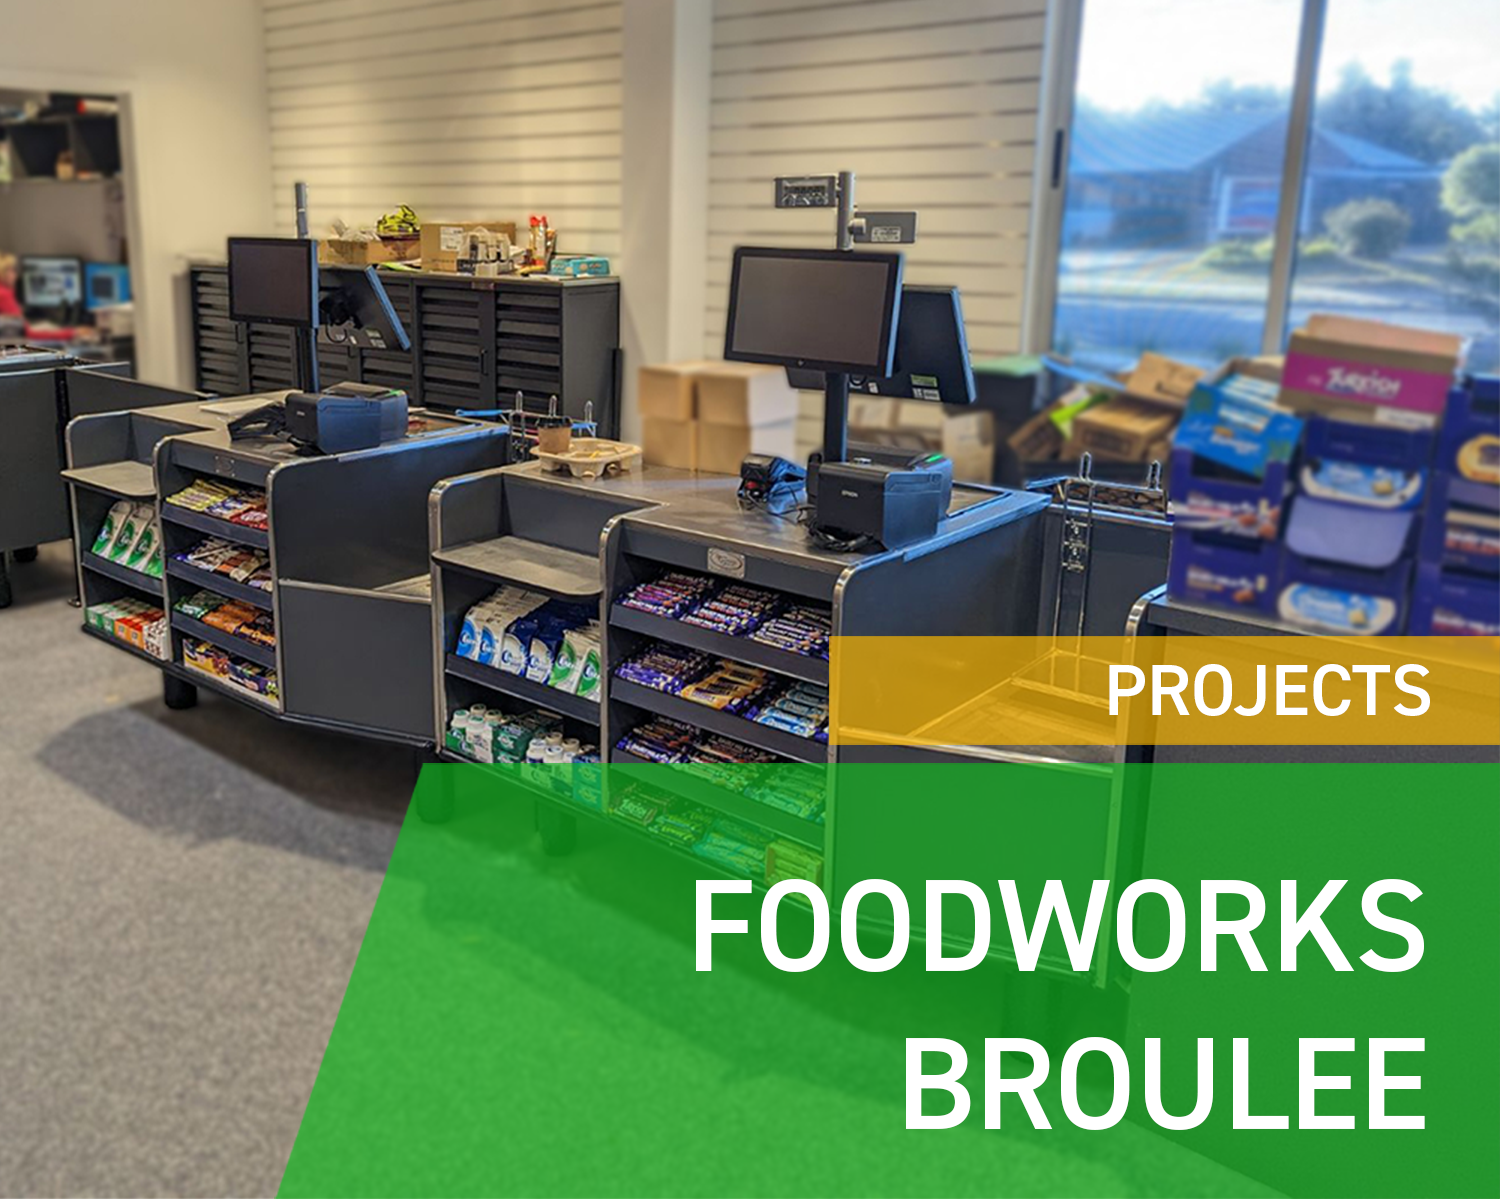 ALL ABOARD! Train Street Central in Broulee NSW opens with a brand-new BCG supplied FoodWorks